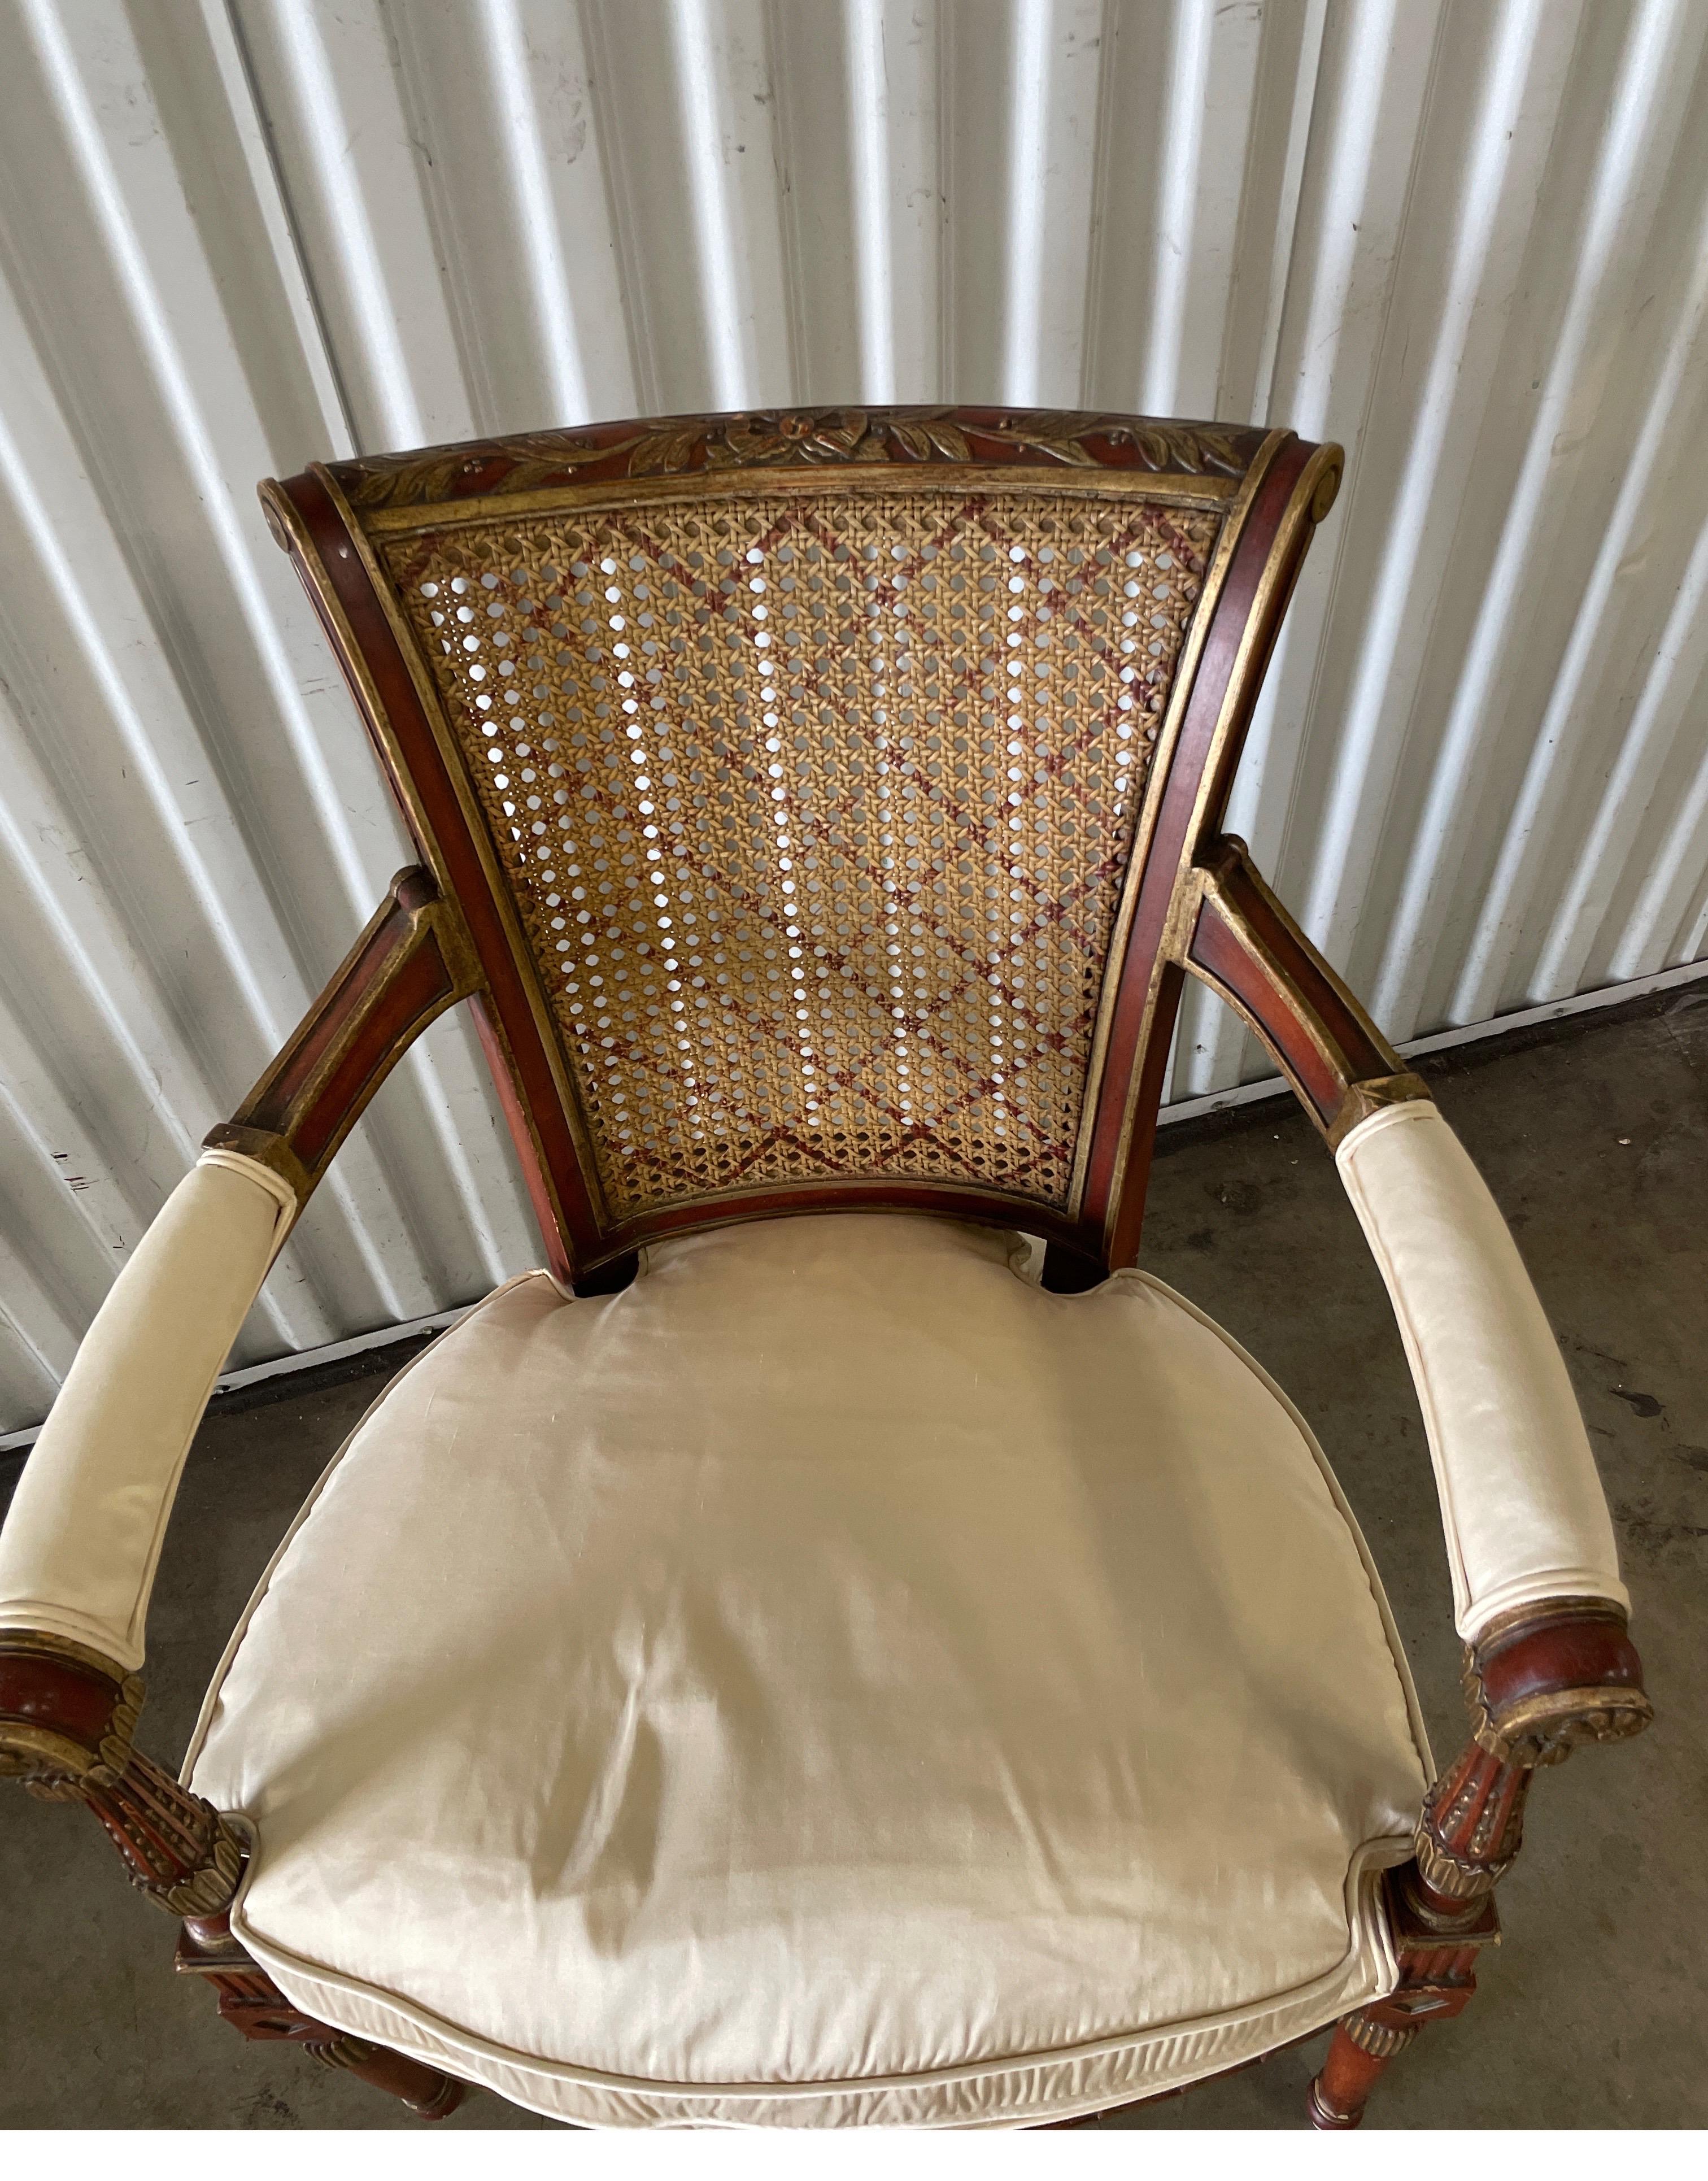 Vintage Regency Style armchair. Cane back with a hand painted lattice motif.
Newly upholstered in bone silk fabric by Scalamandre.